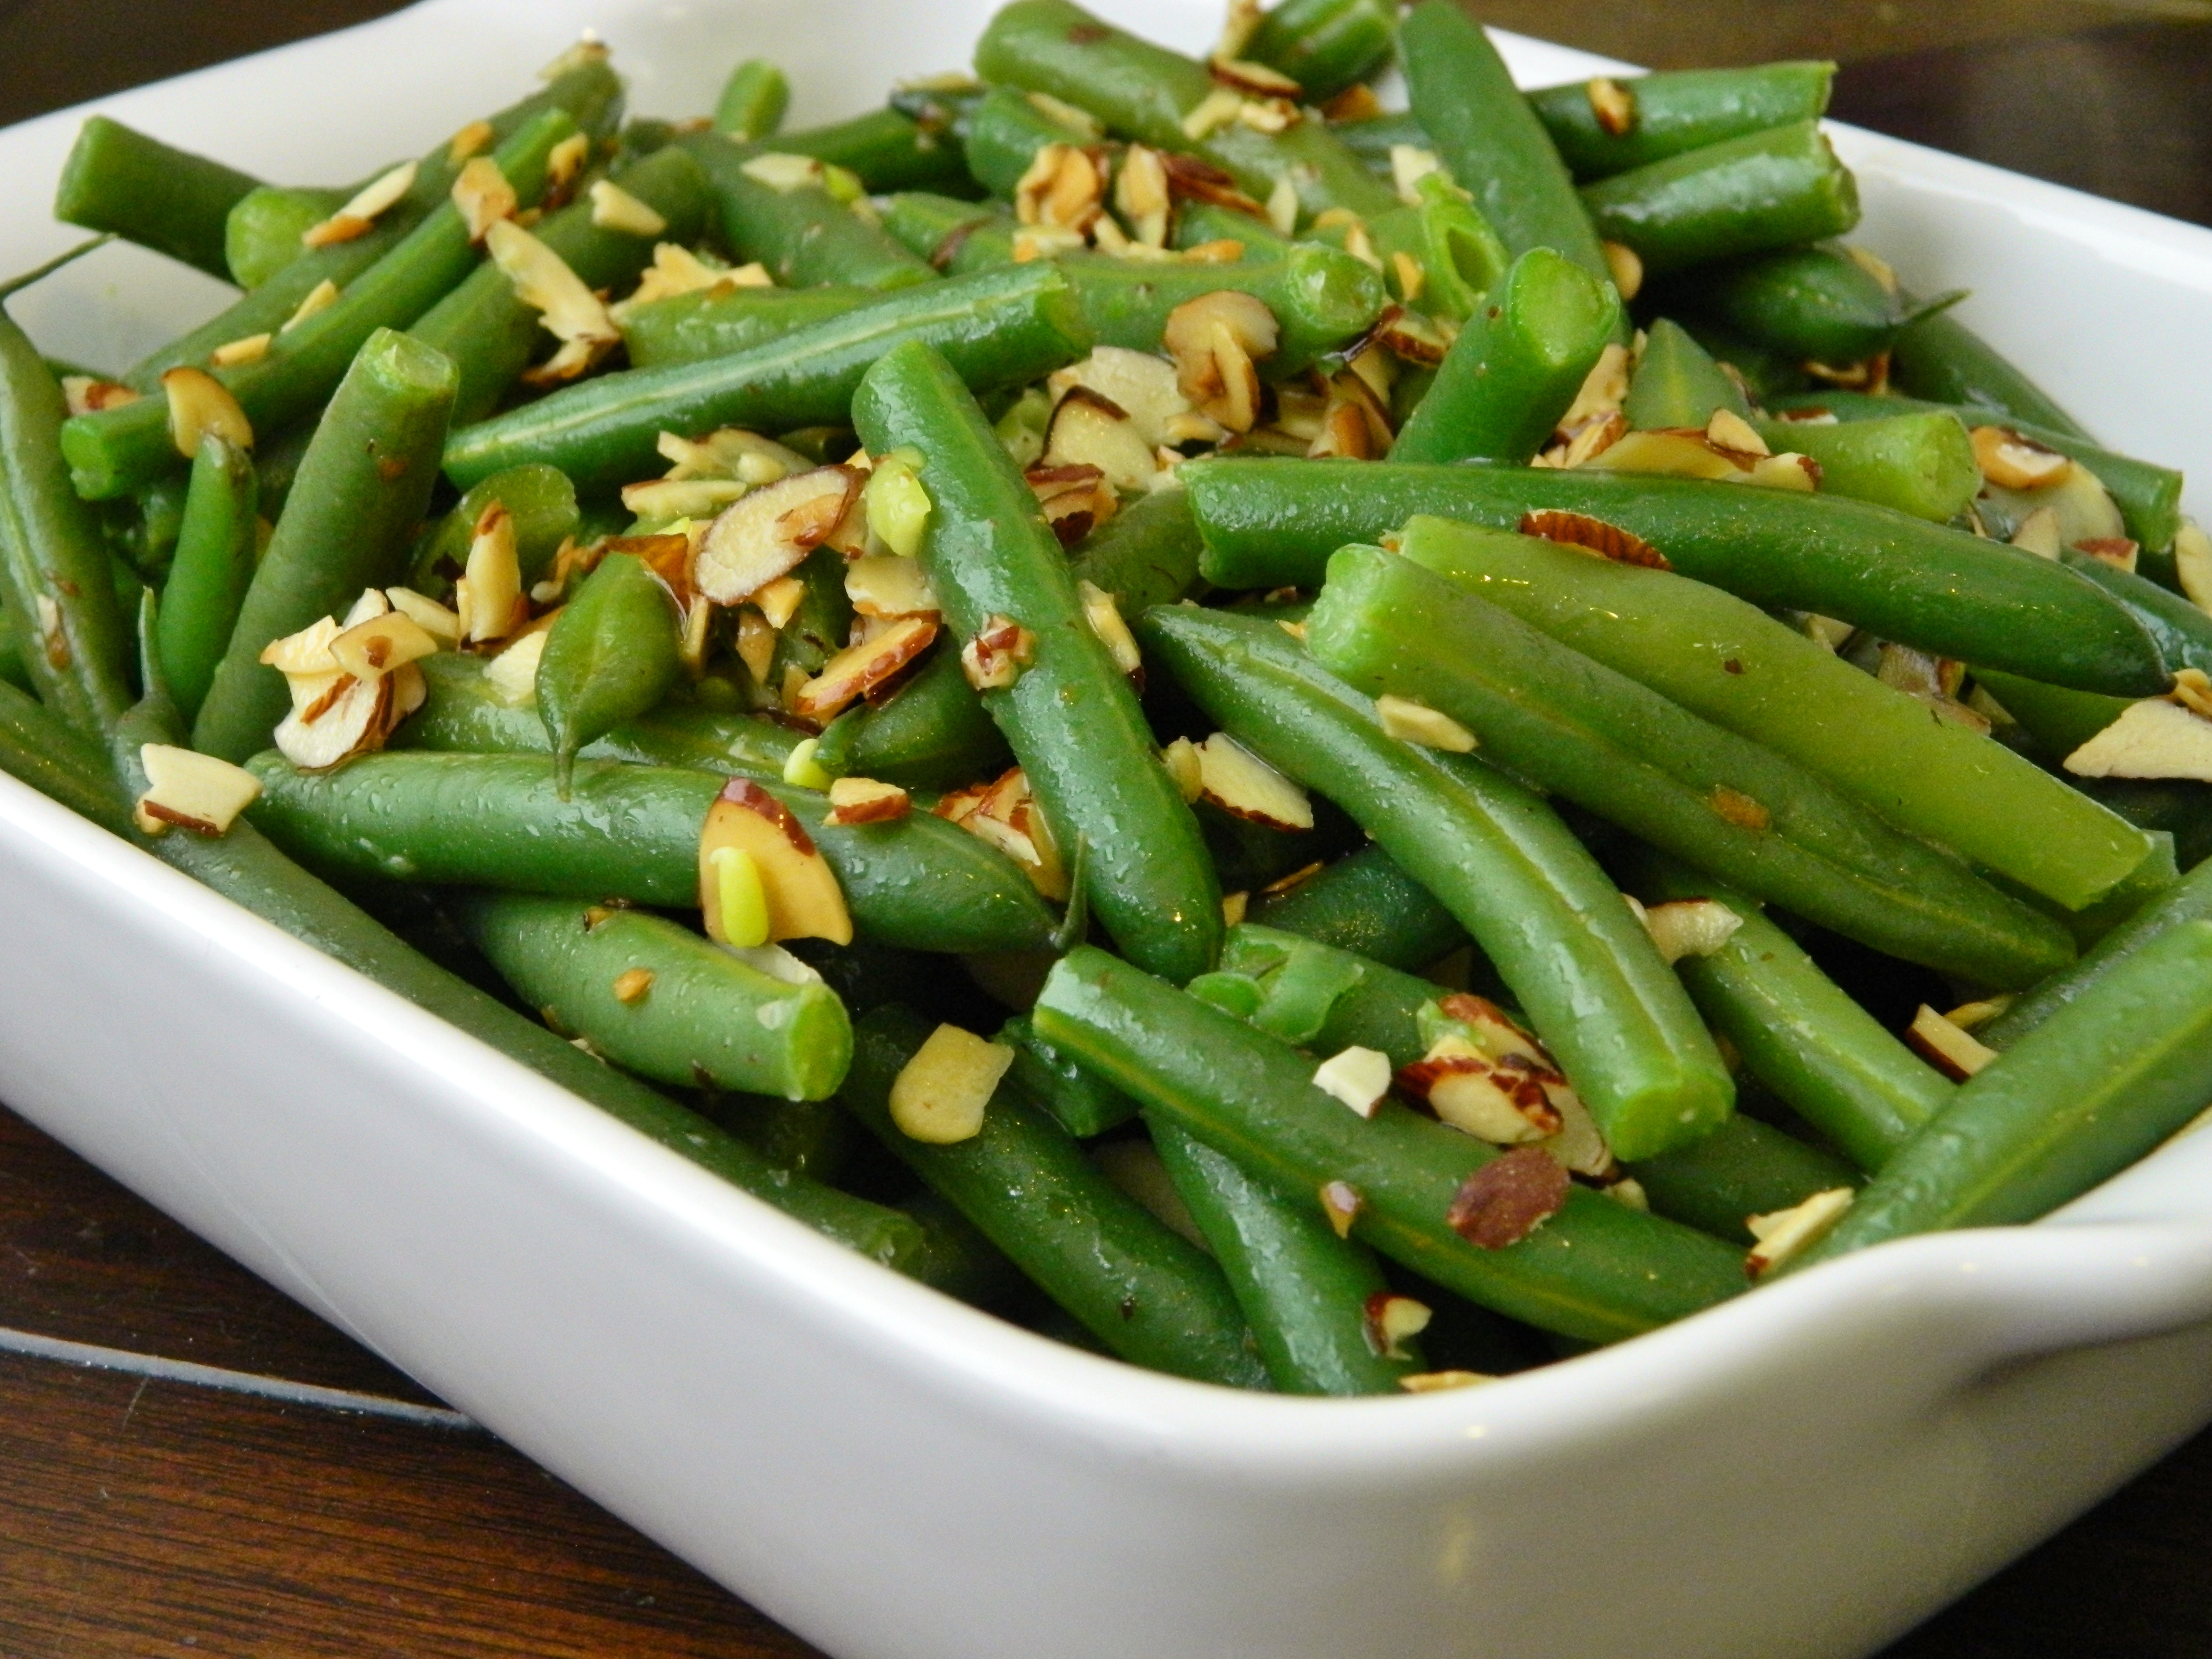 Buttered Green Beans with Almond Slivers